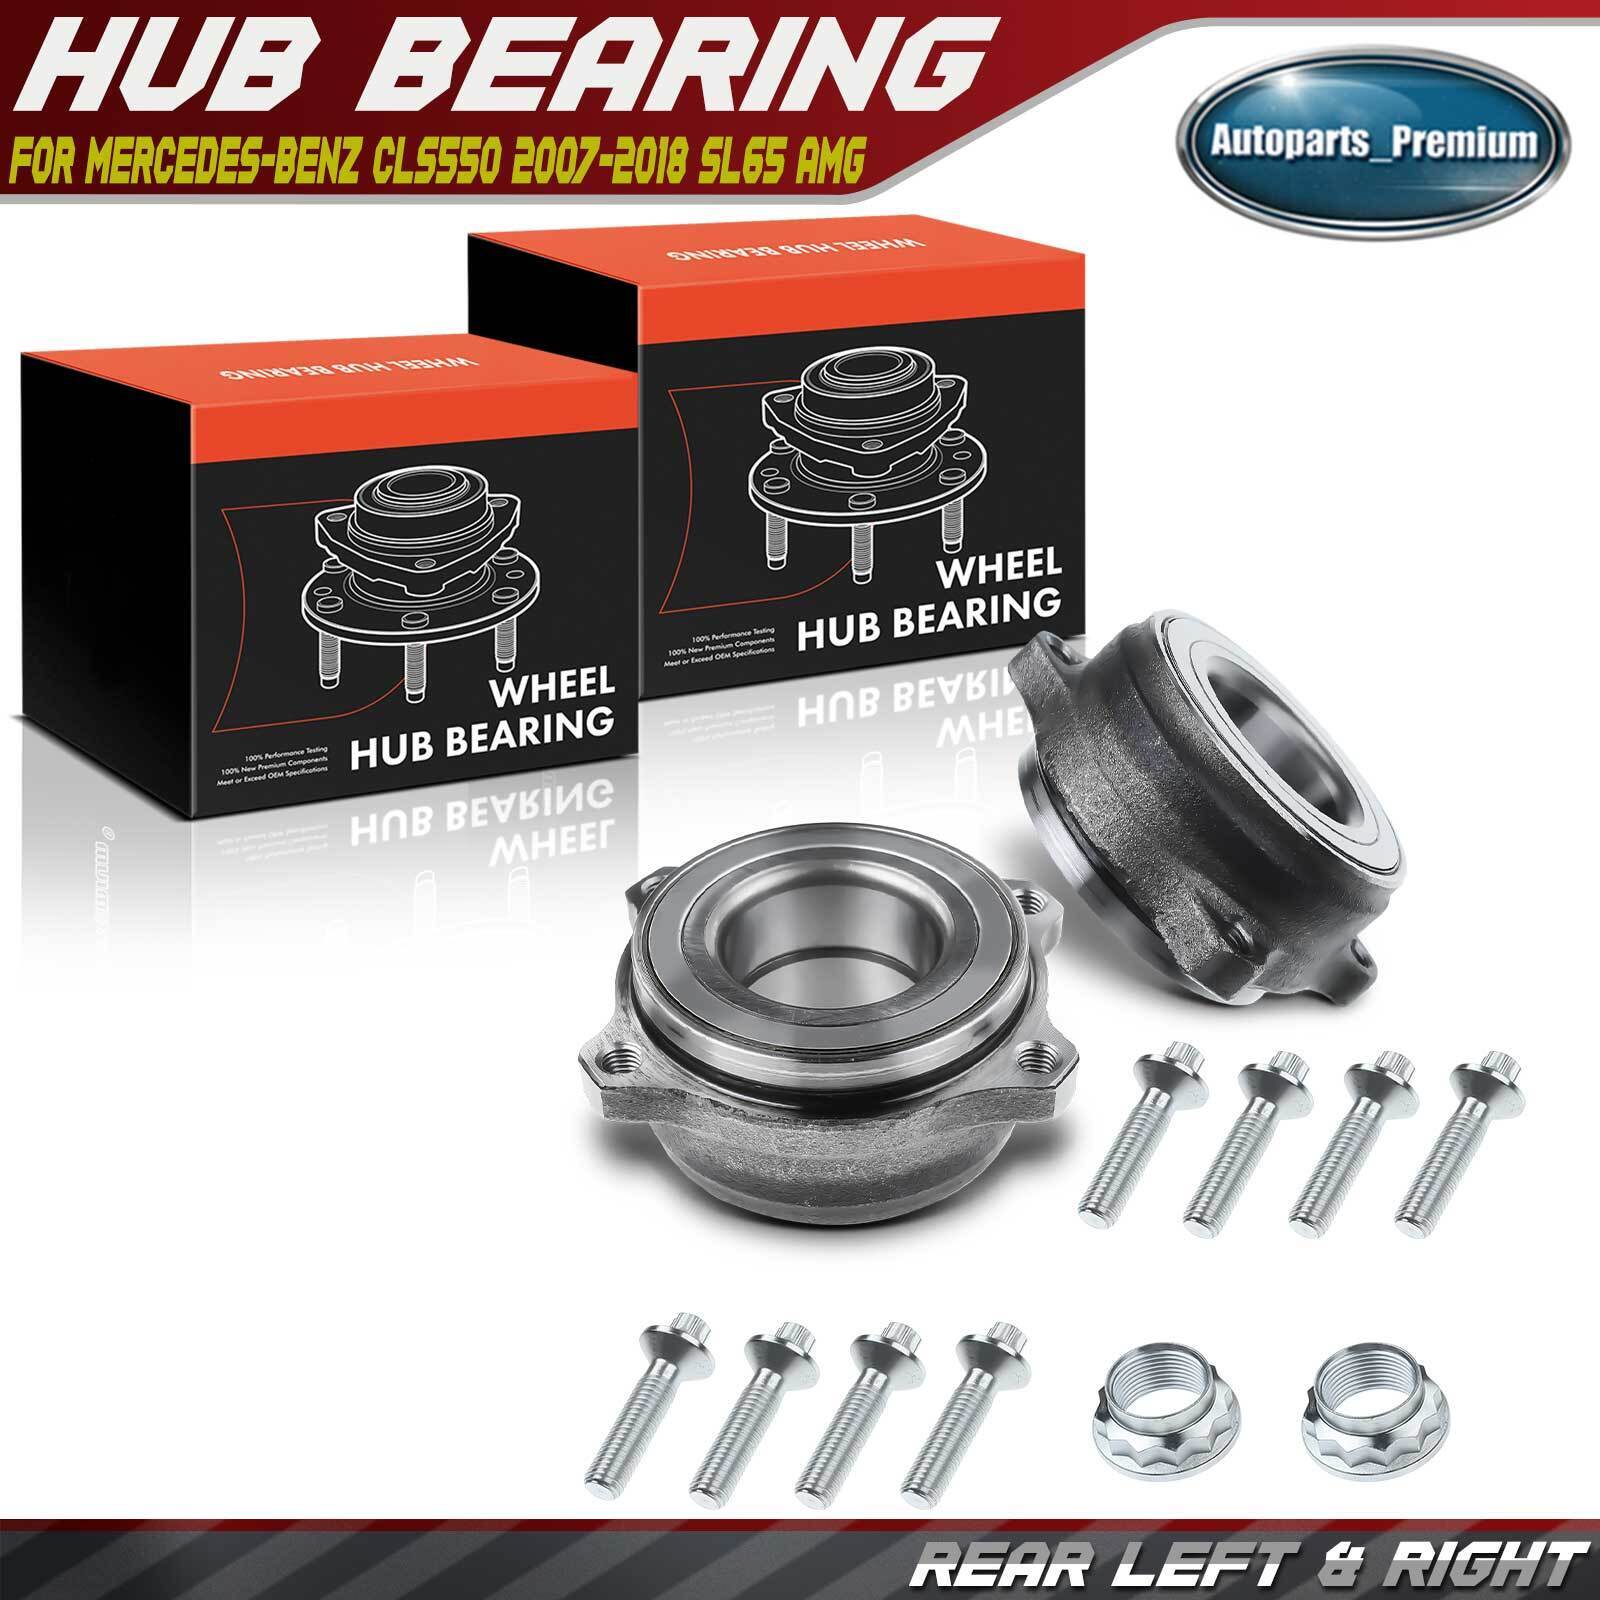 2x F & R Wheel Hub Bearing Assembly for Mercedes-Benz CL550 2007-2014 CL600 E250